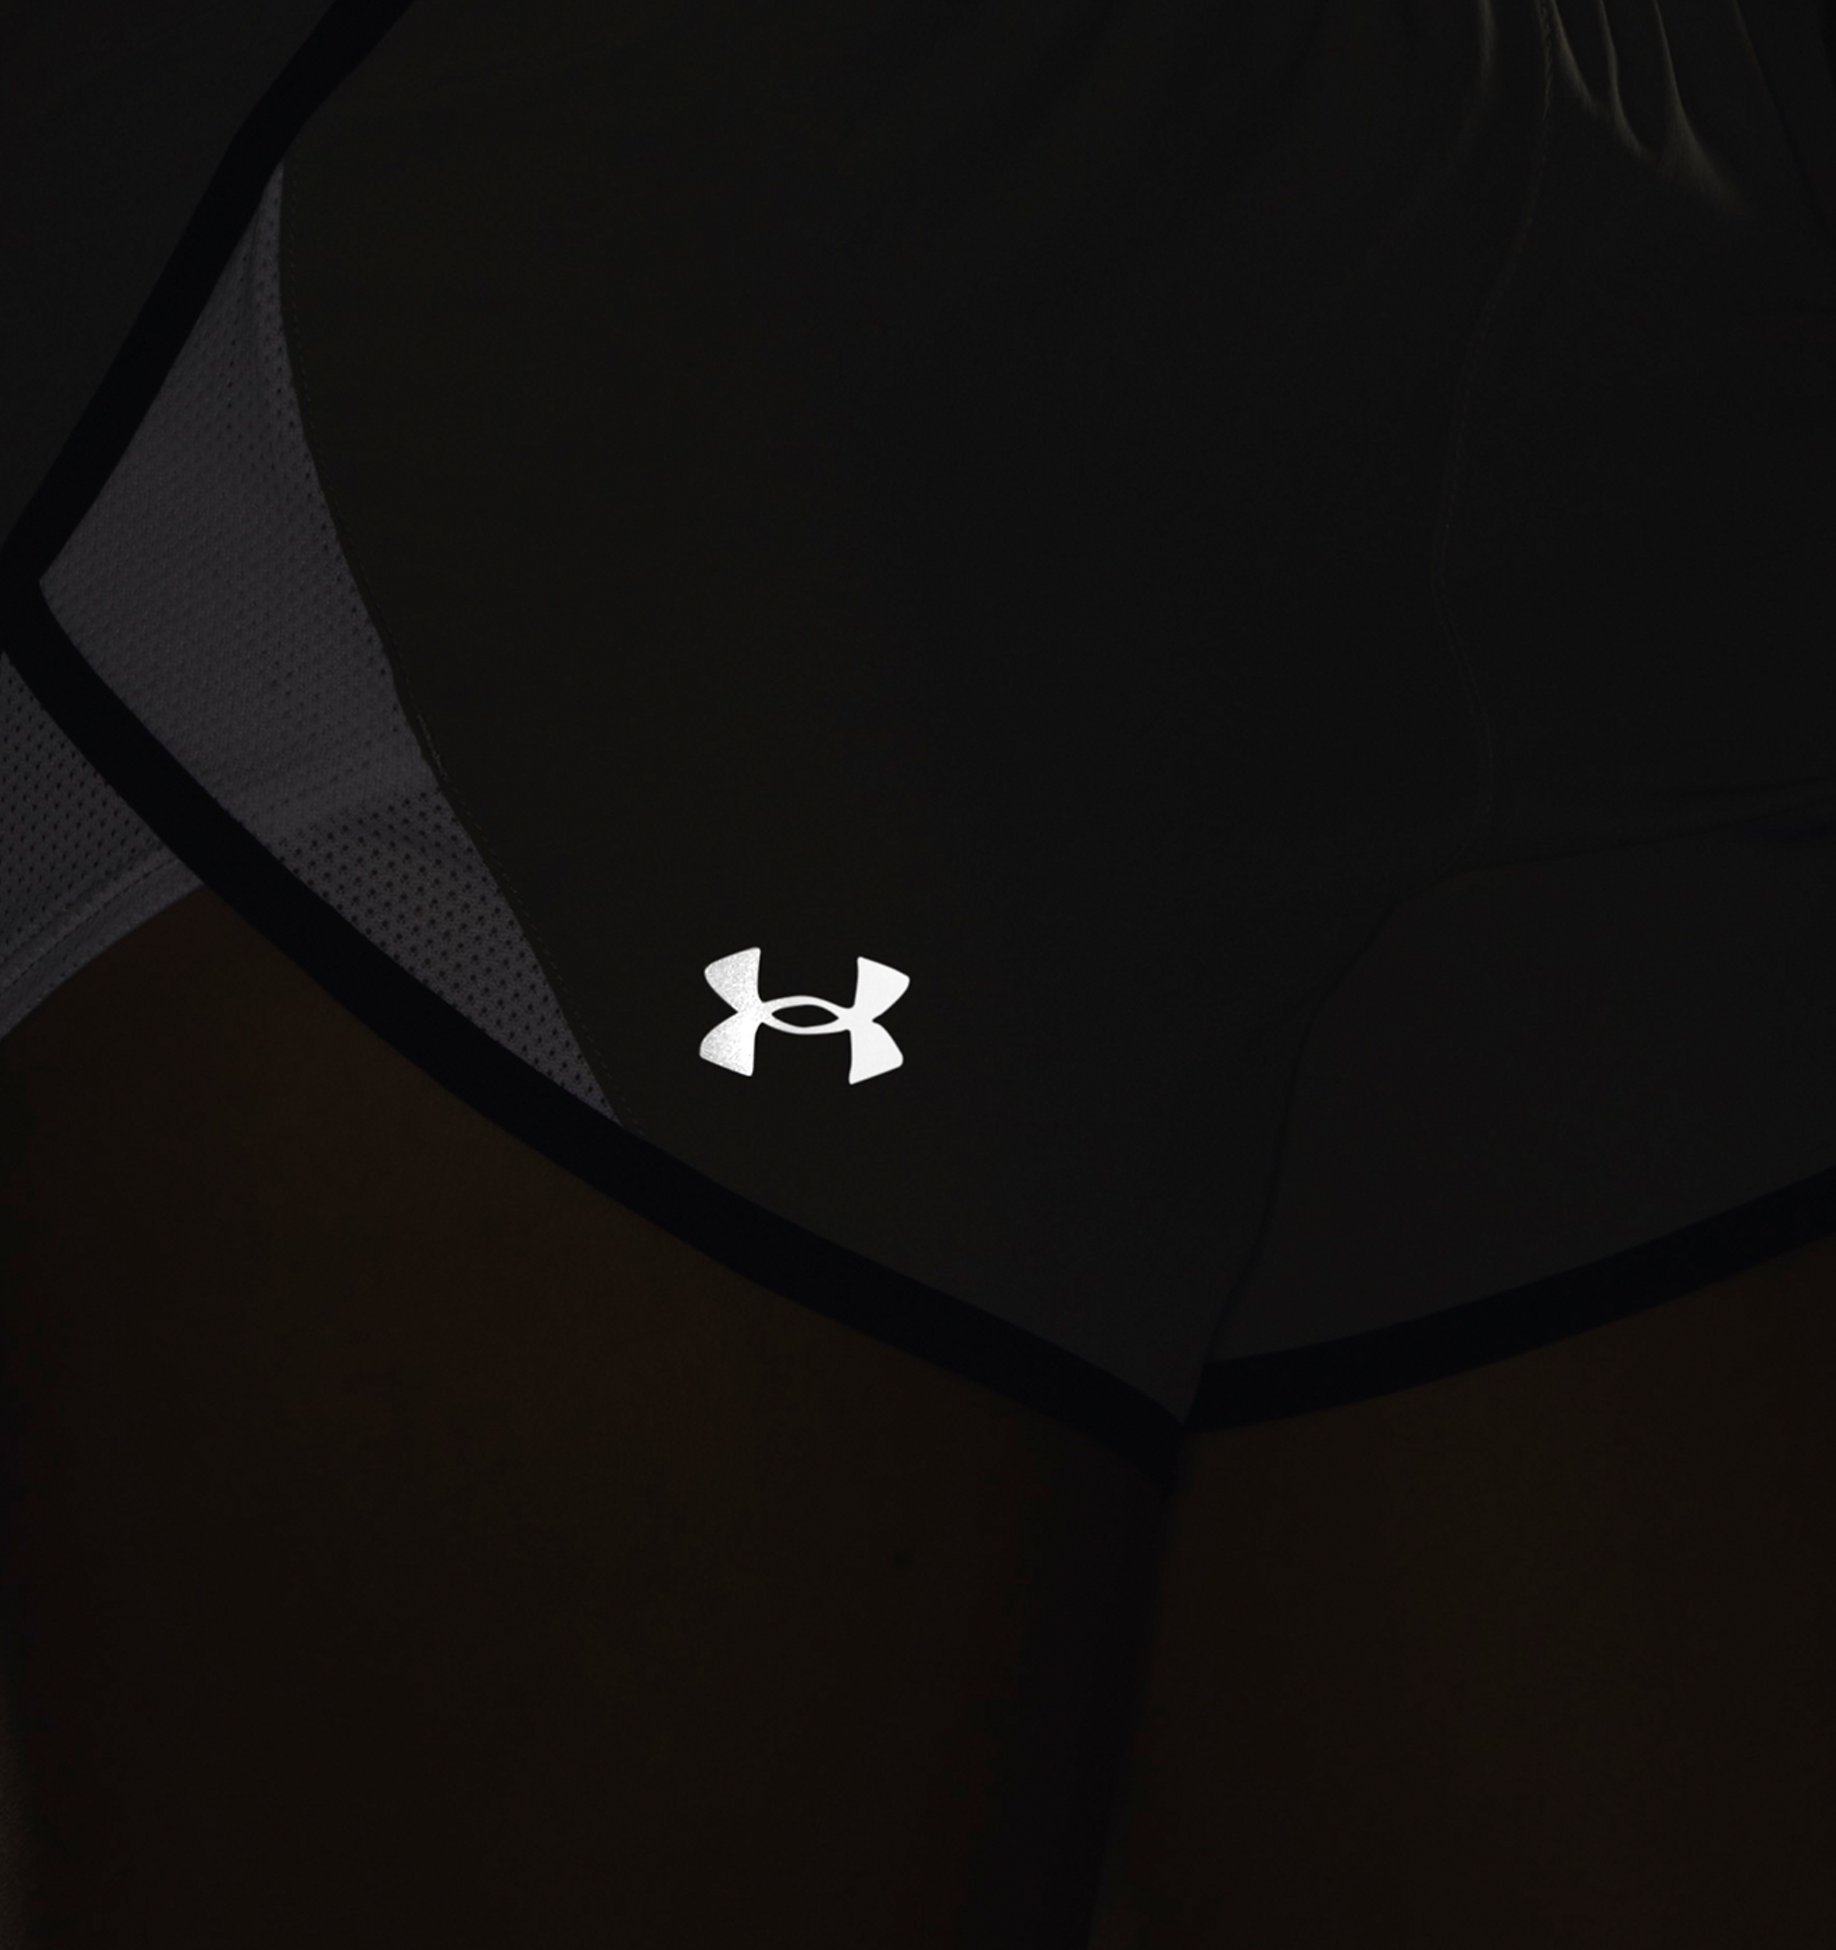 Calções Mulher Under Armour Fly By 2.0 2-In-1 (Tam: M)